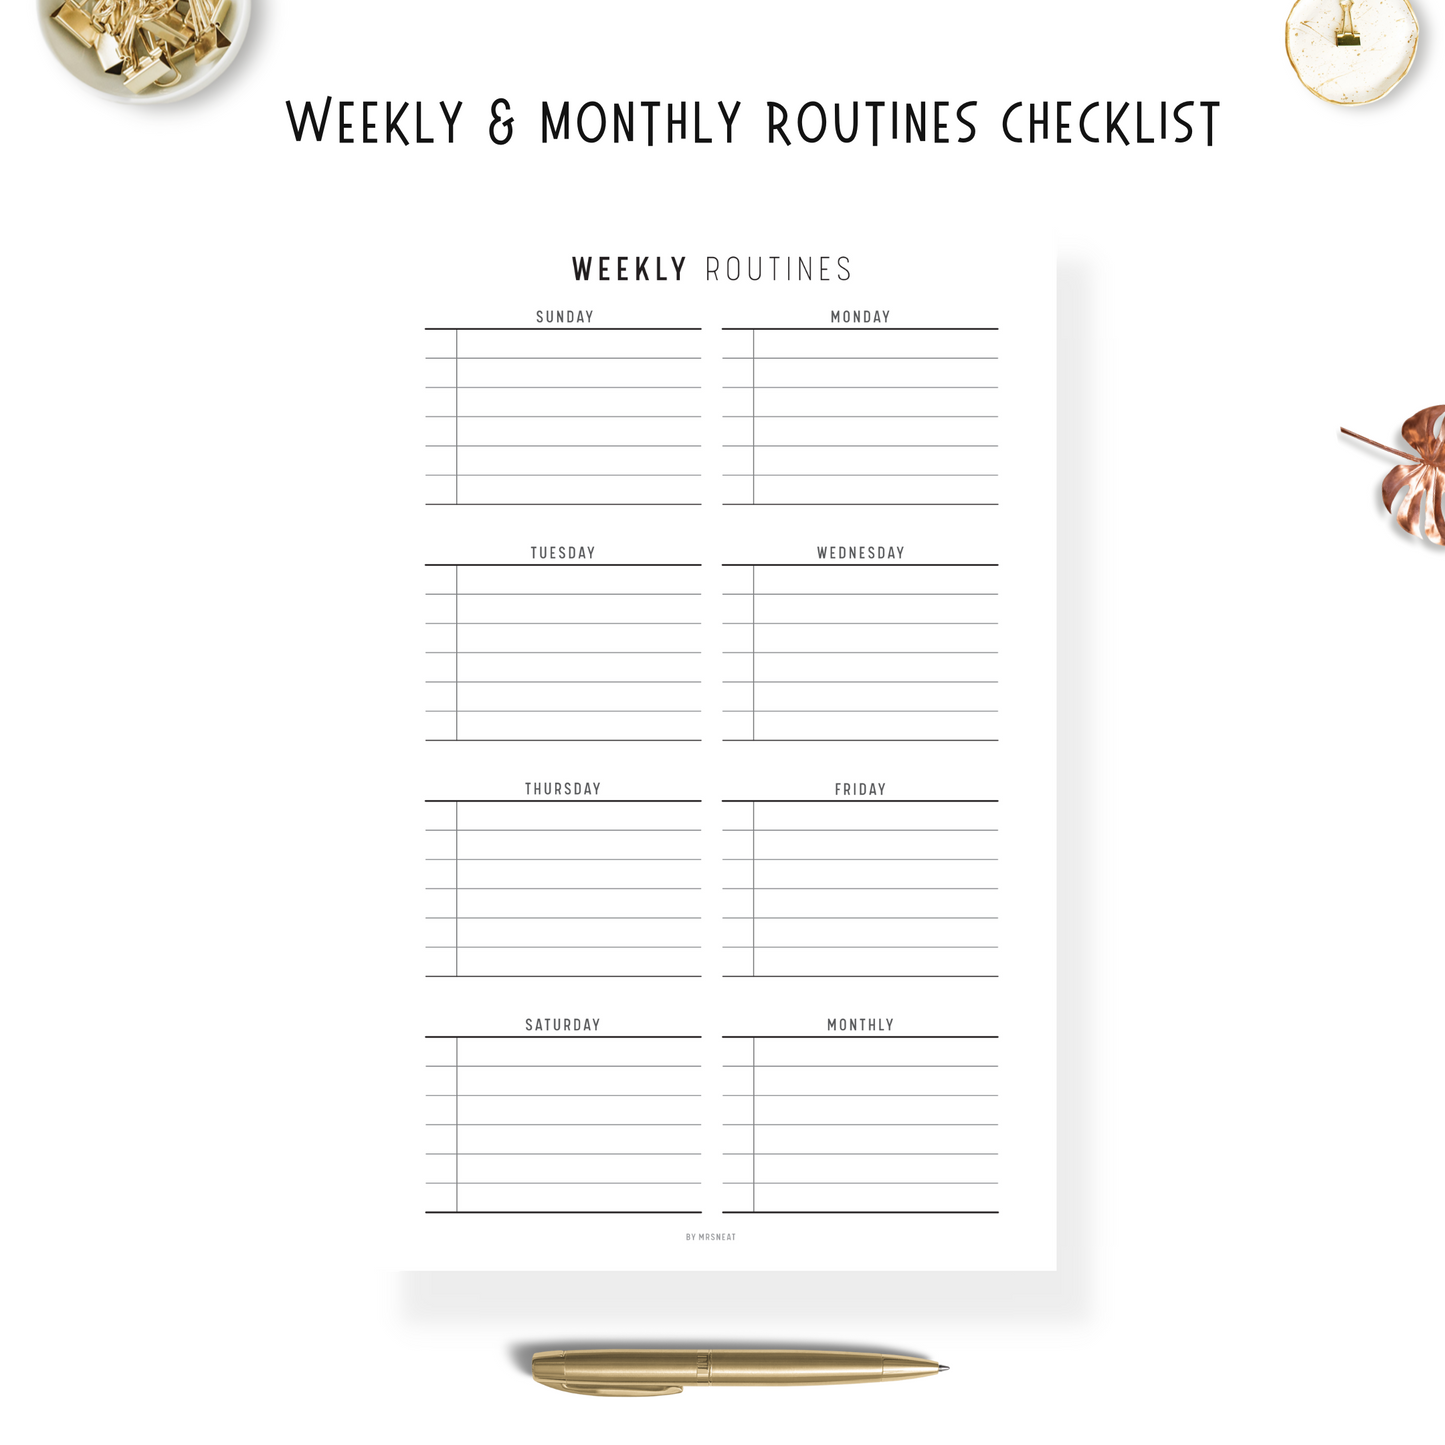 Weekly and Monthly Routines Checklist with room for 7 days and Monthly 